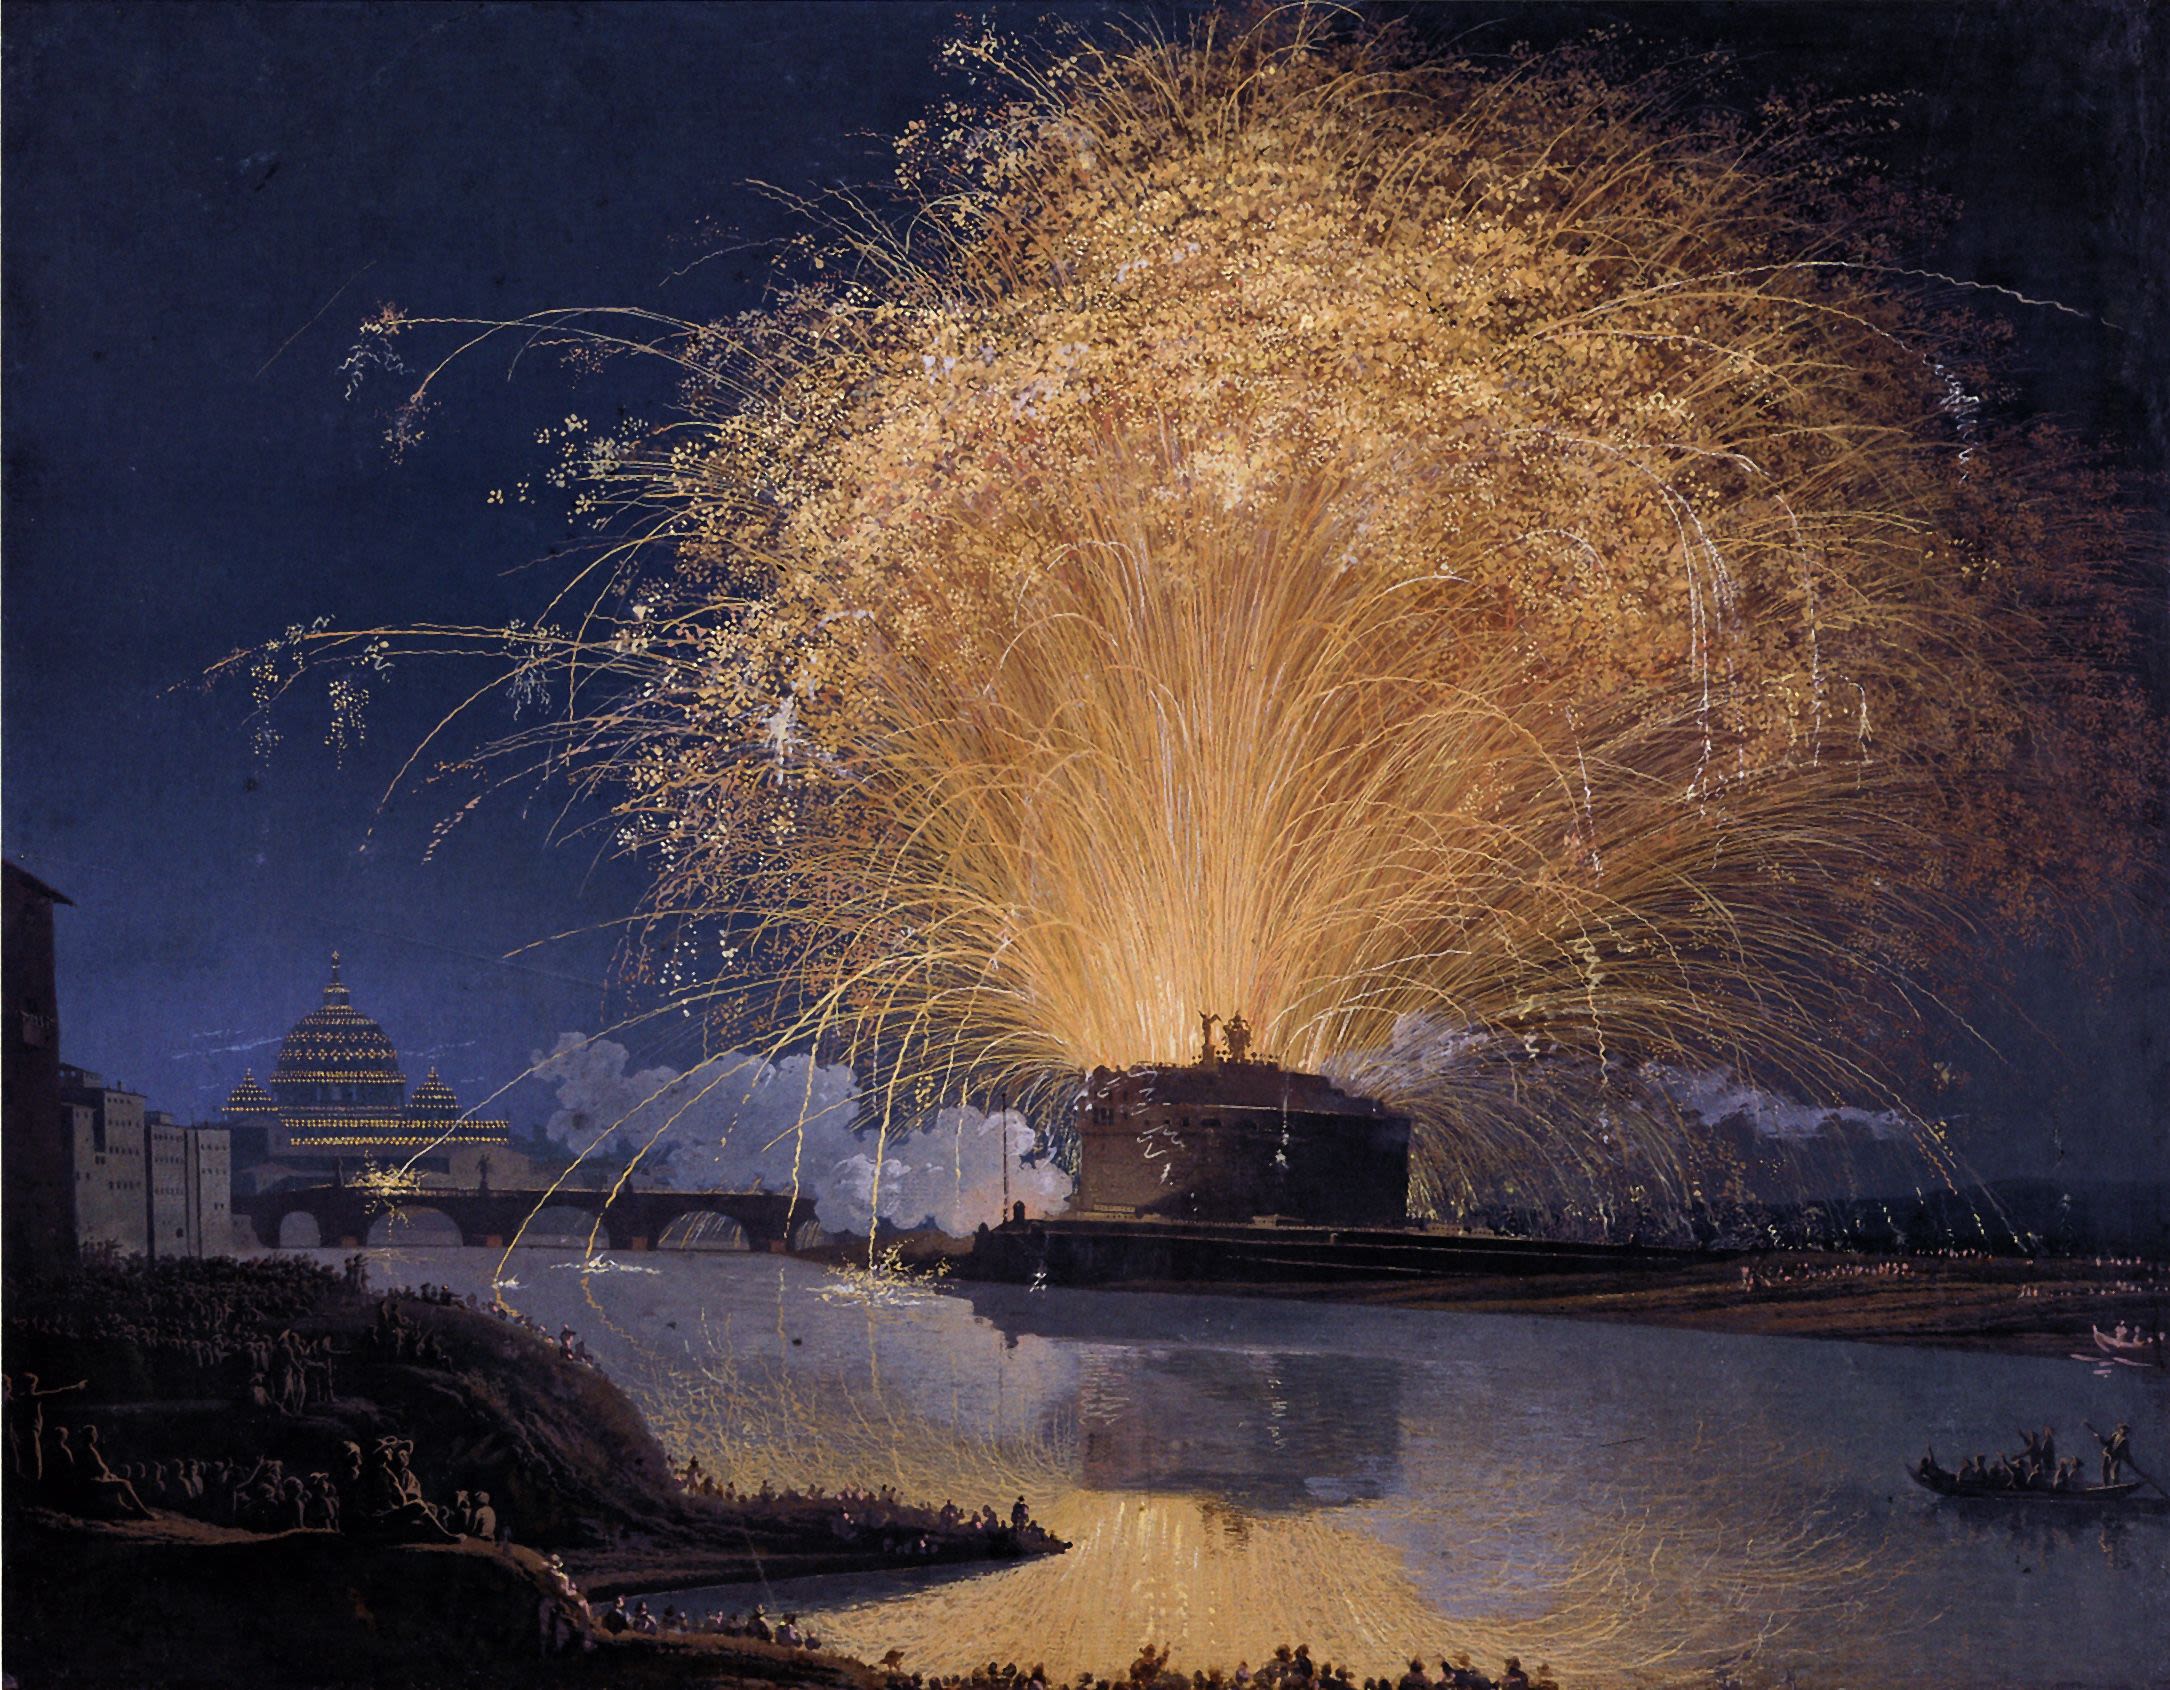 Vatican fireworks: A tradition for solemnity of Sts. Peter and Paul